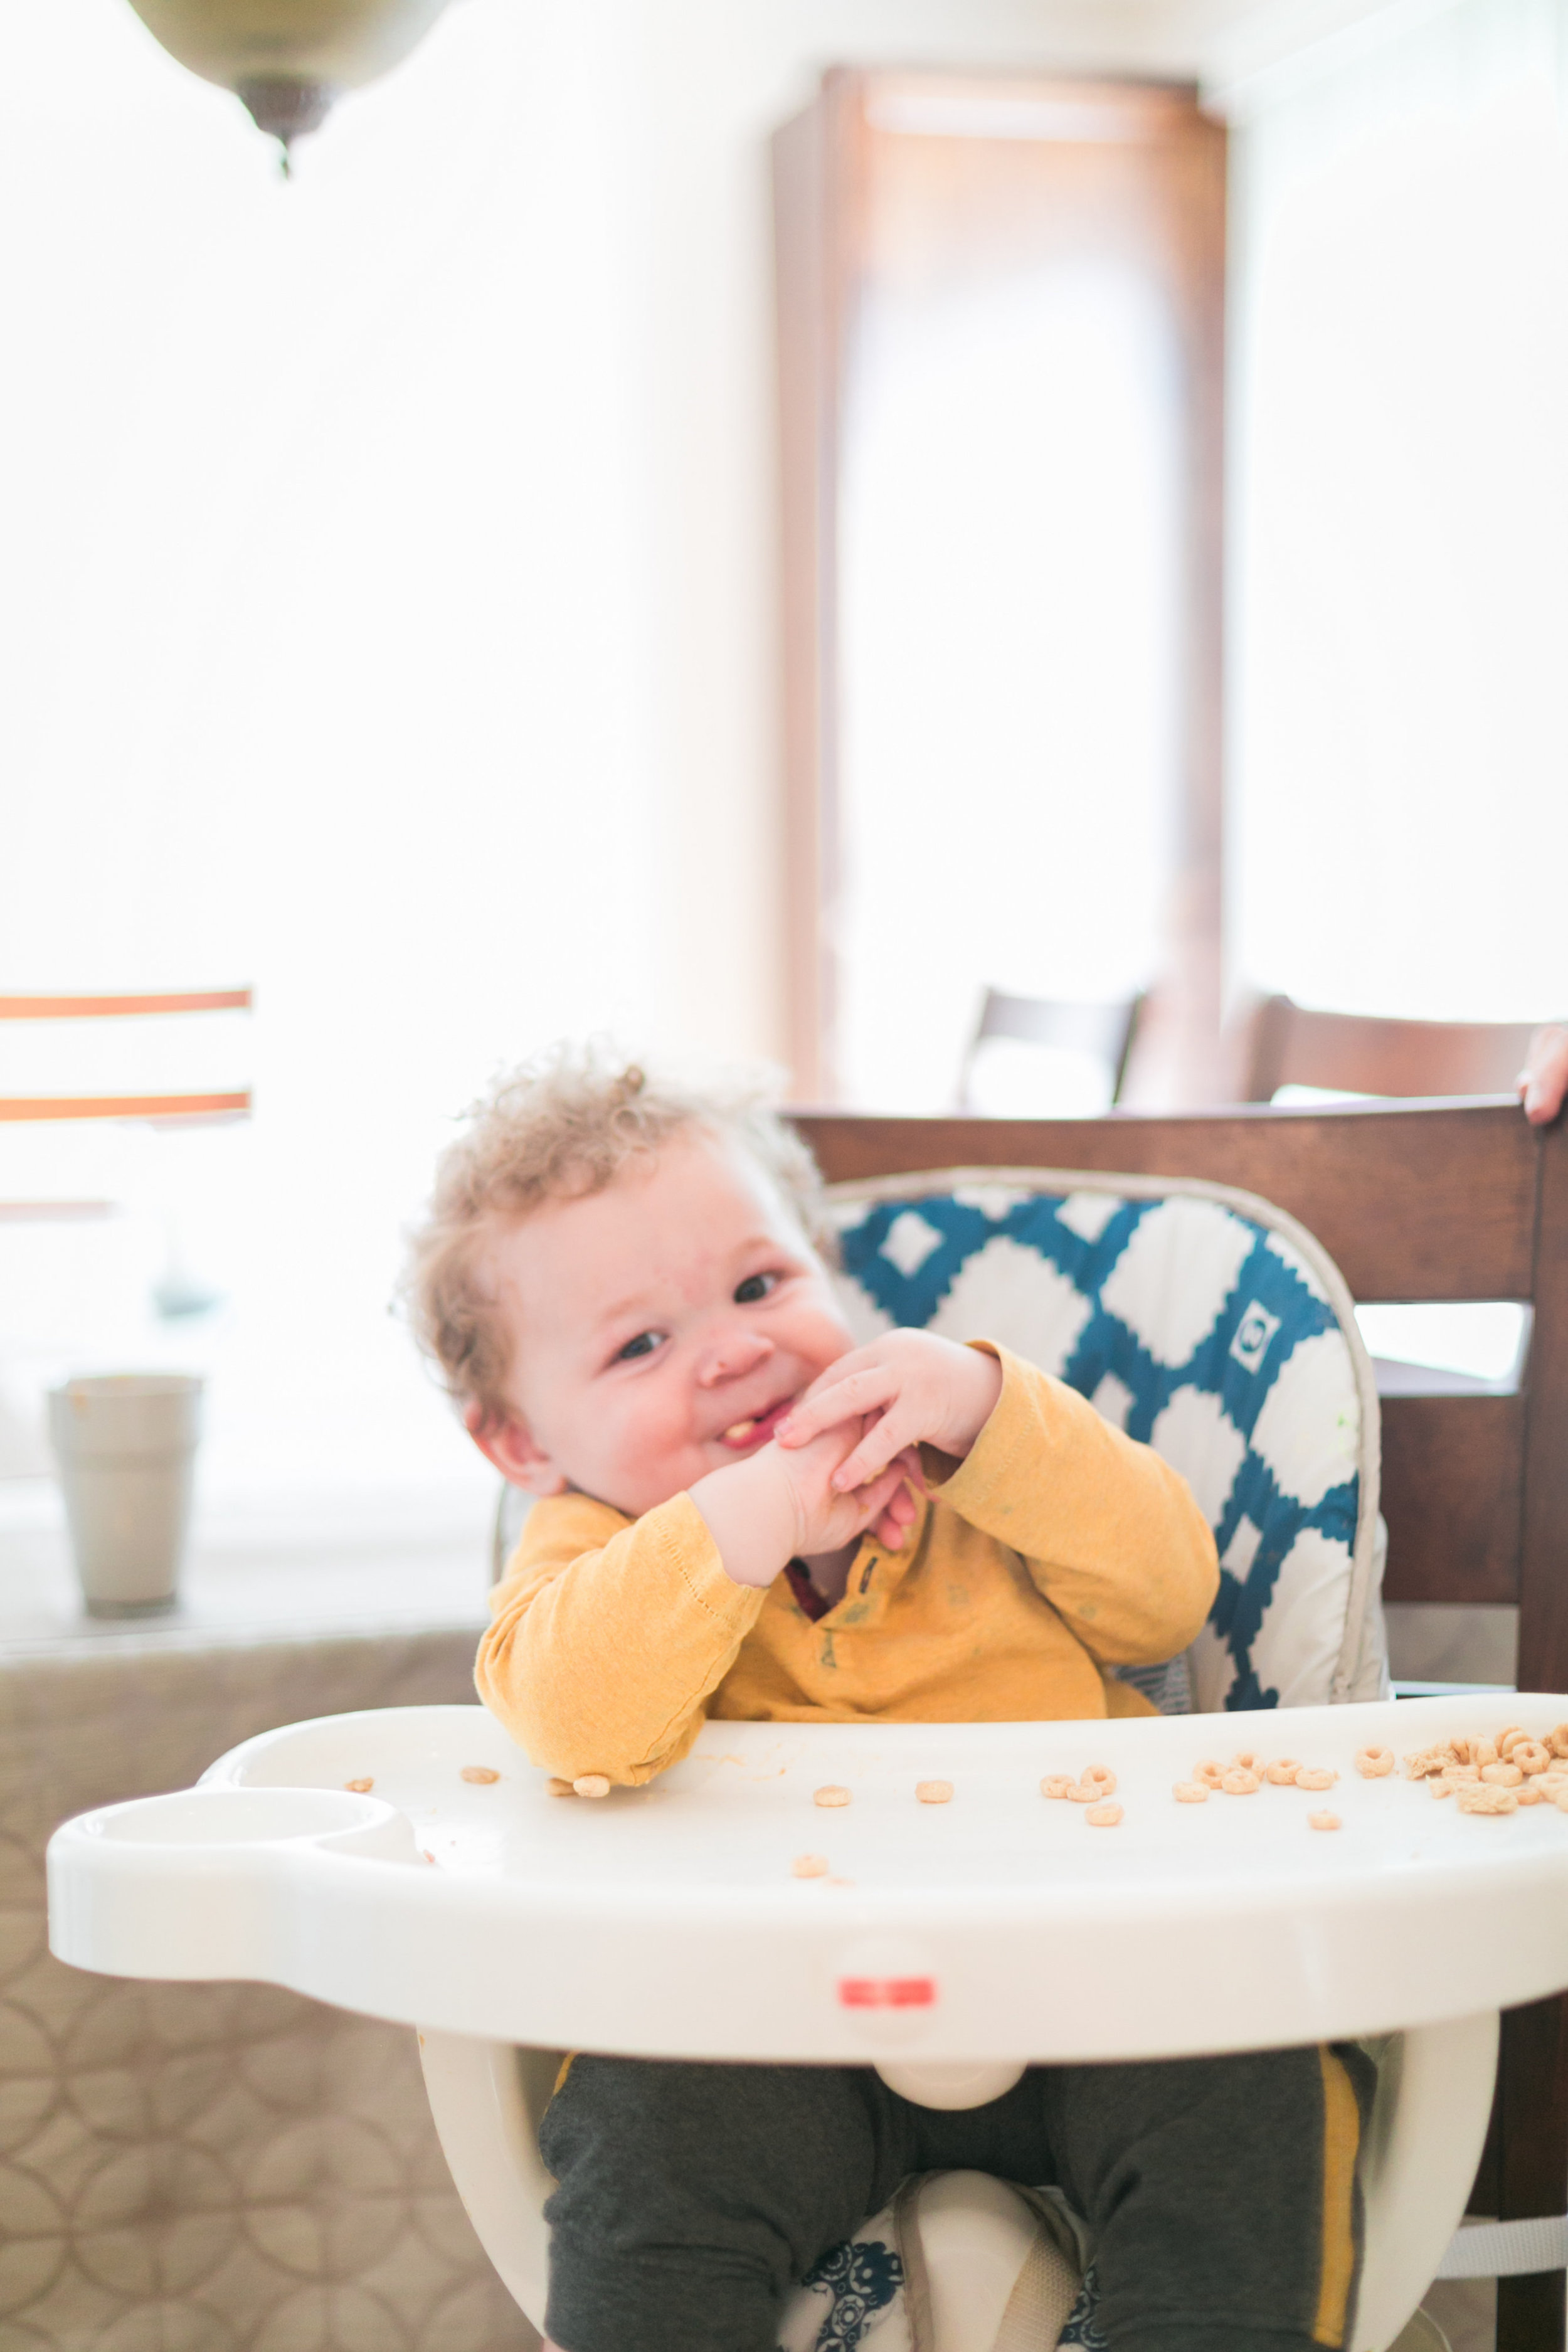 Is your Little One Ready for Solids?